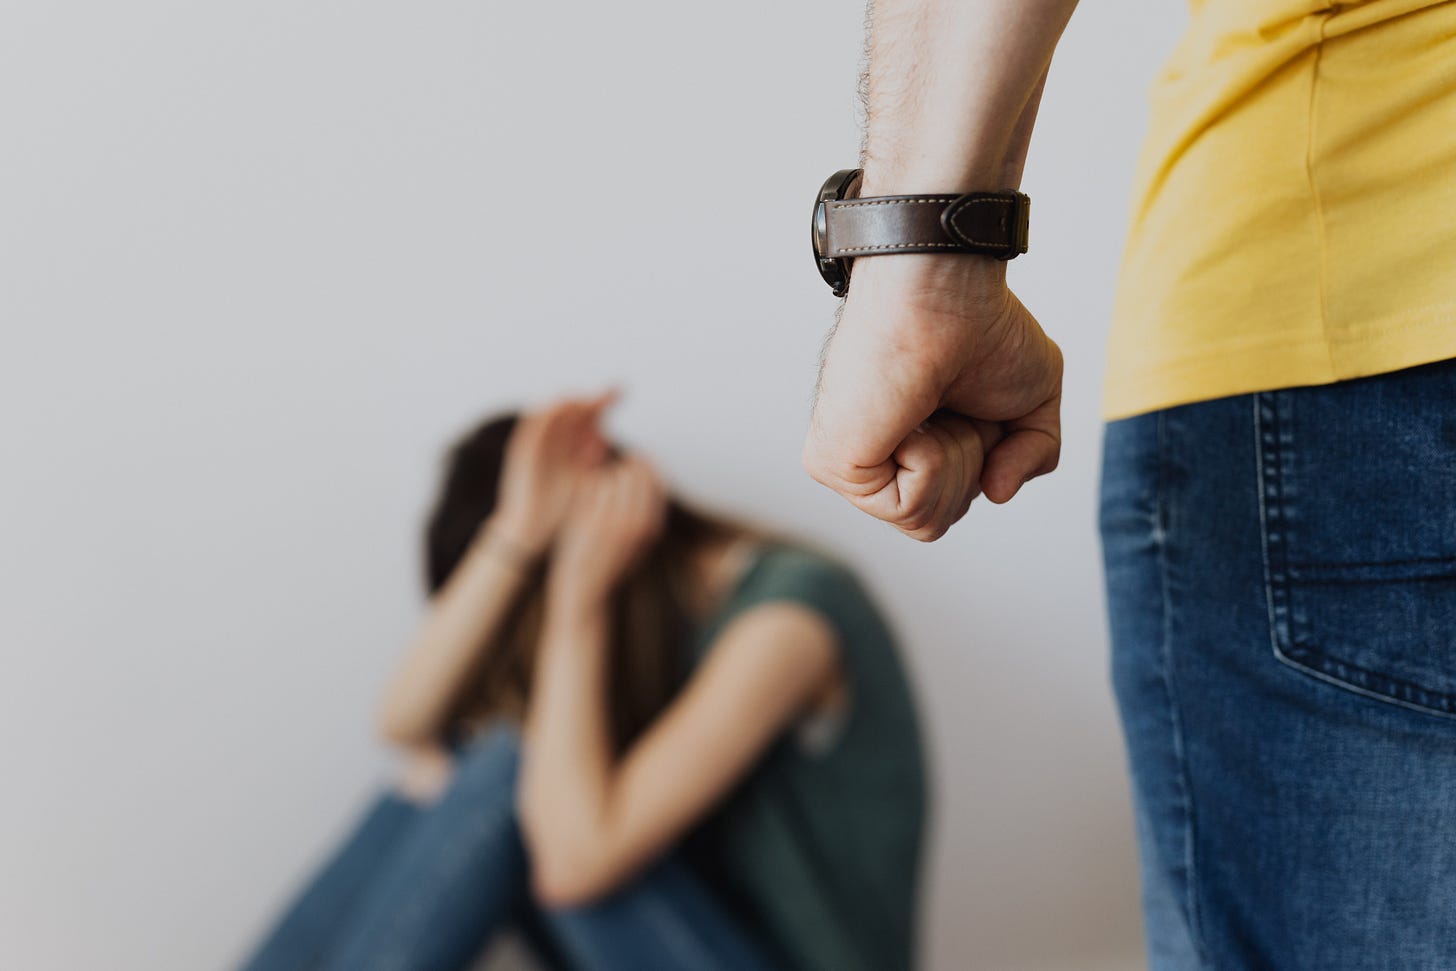 a person wearing a bulky watch, yellow shirt and jeans, with a clenched fist is facing a scared person who is curled agaist the wall with their hands up in a defensive posture